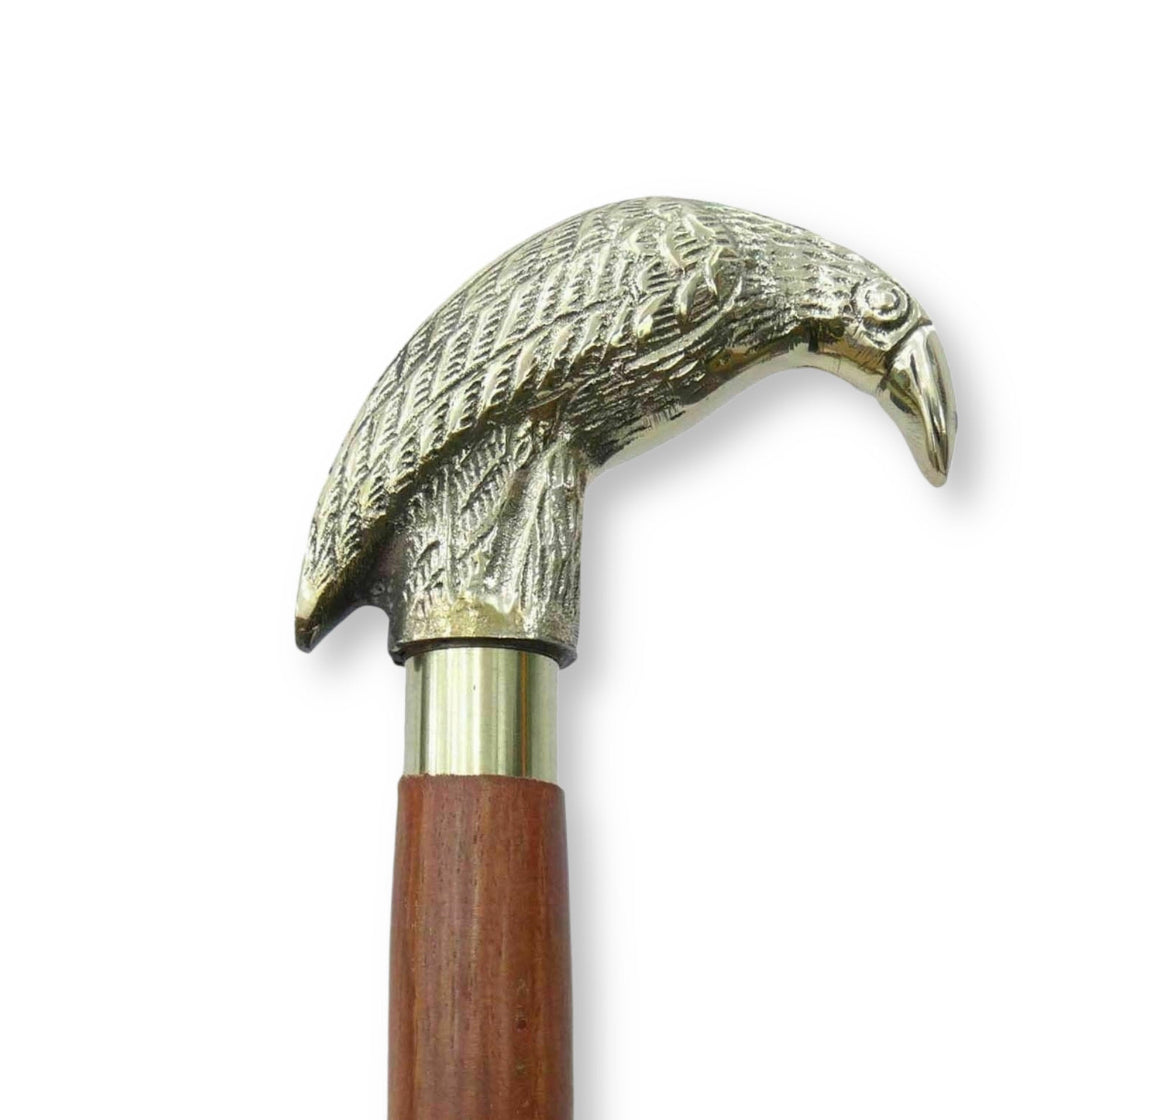 Raven Head walking stick for Use or Gifting